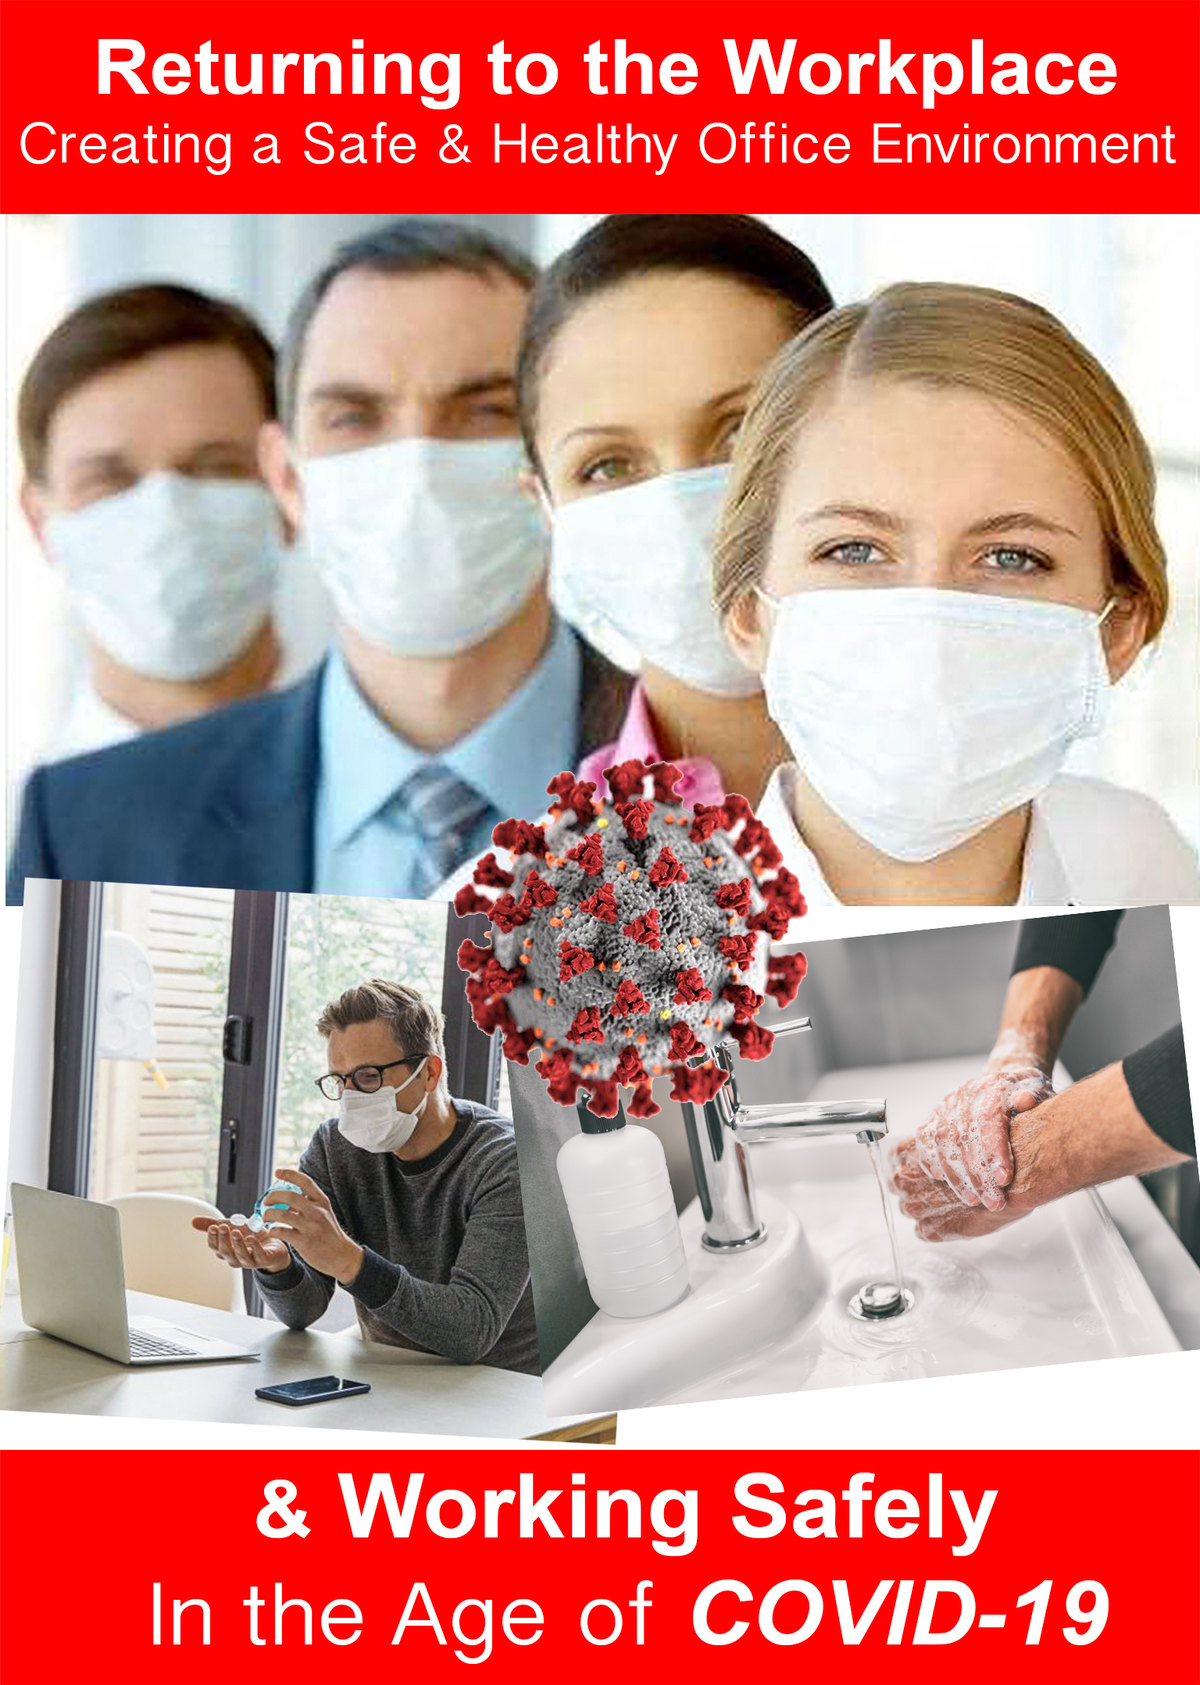 L7082 - Returning to the Workplace - Creating a Safe and Healthy Office Environment and Working Safely in the Age of the COVID-19 Pandemic